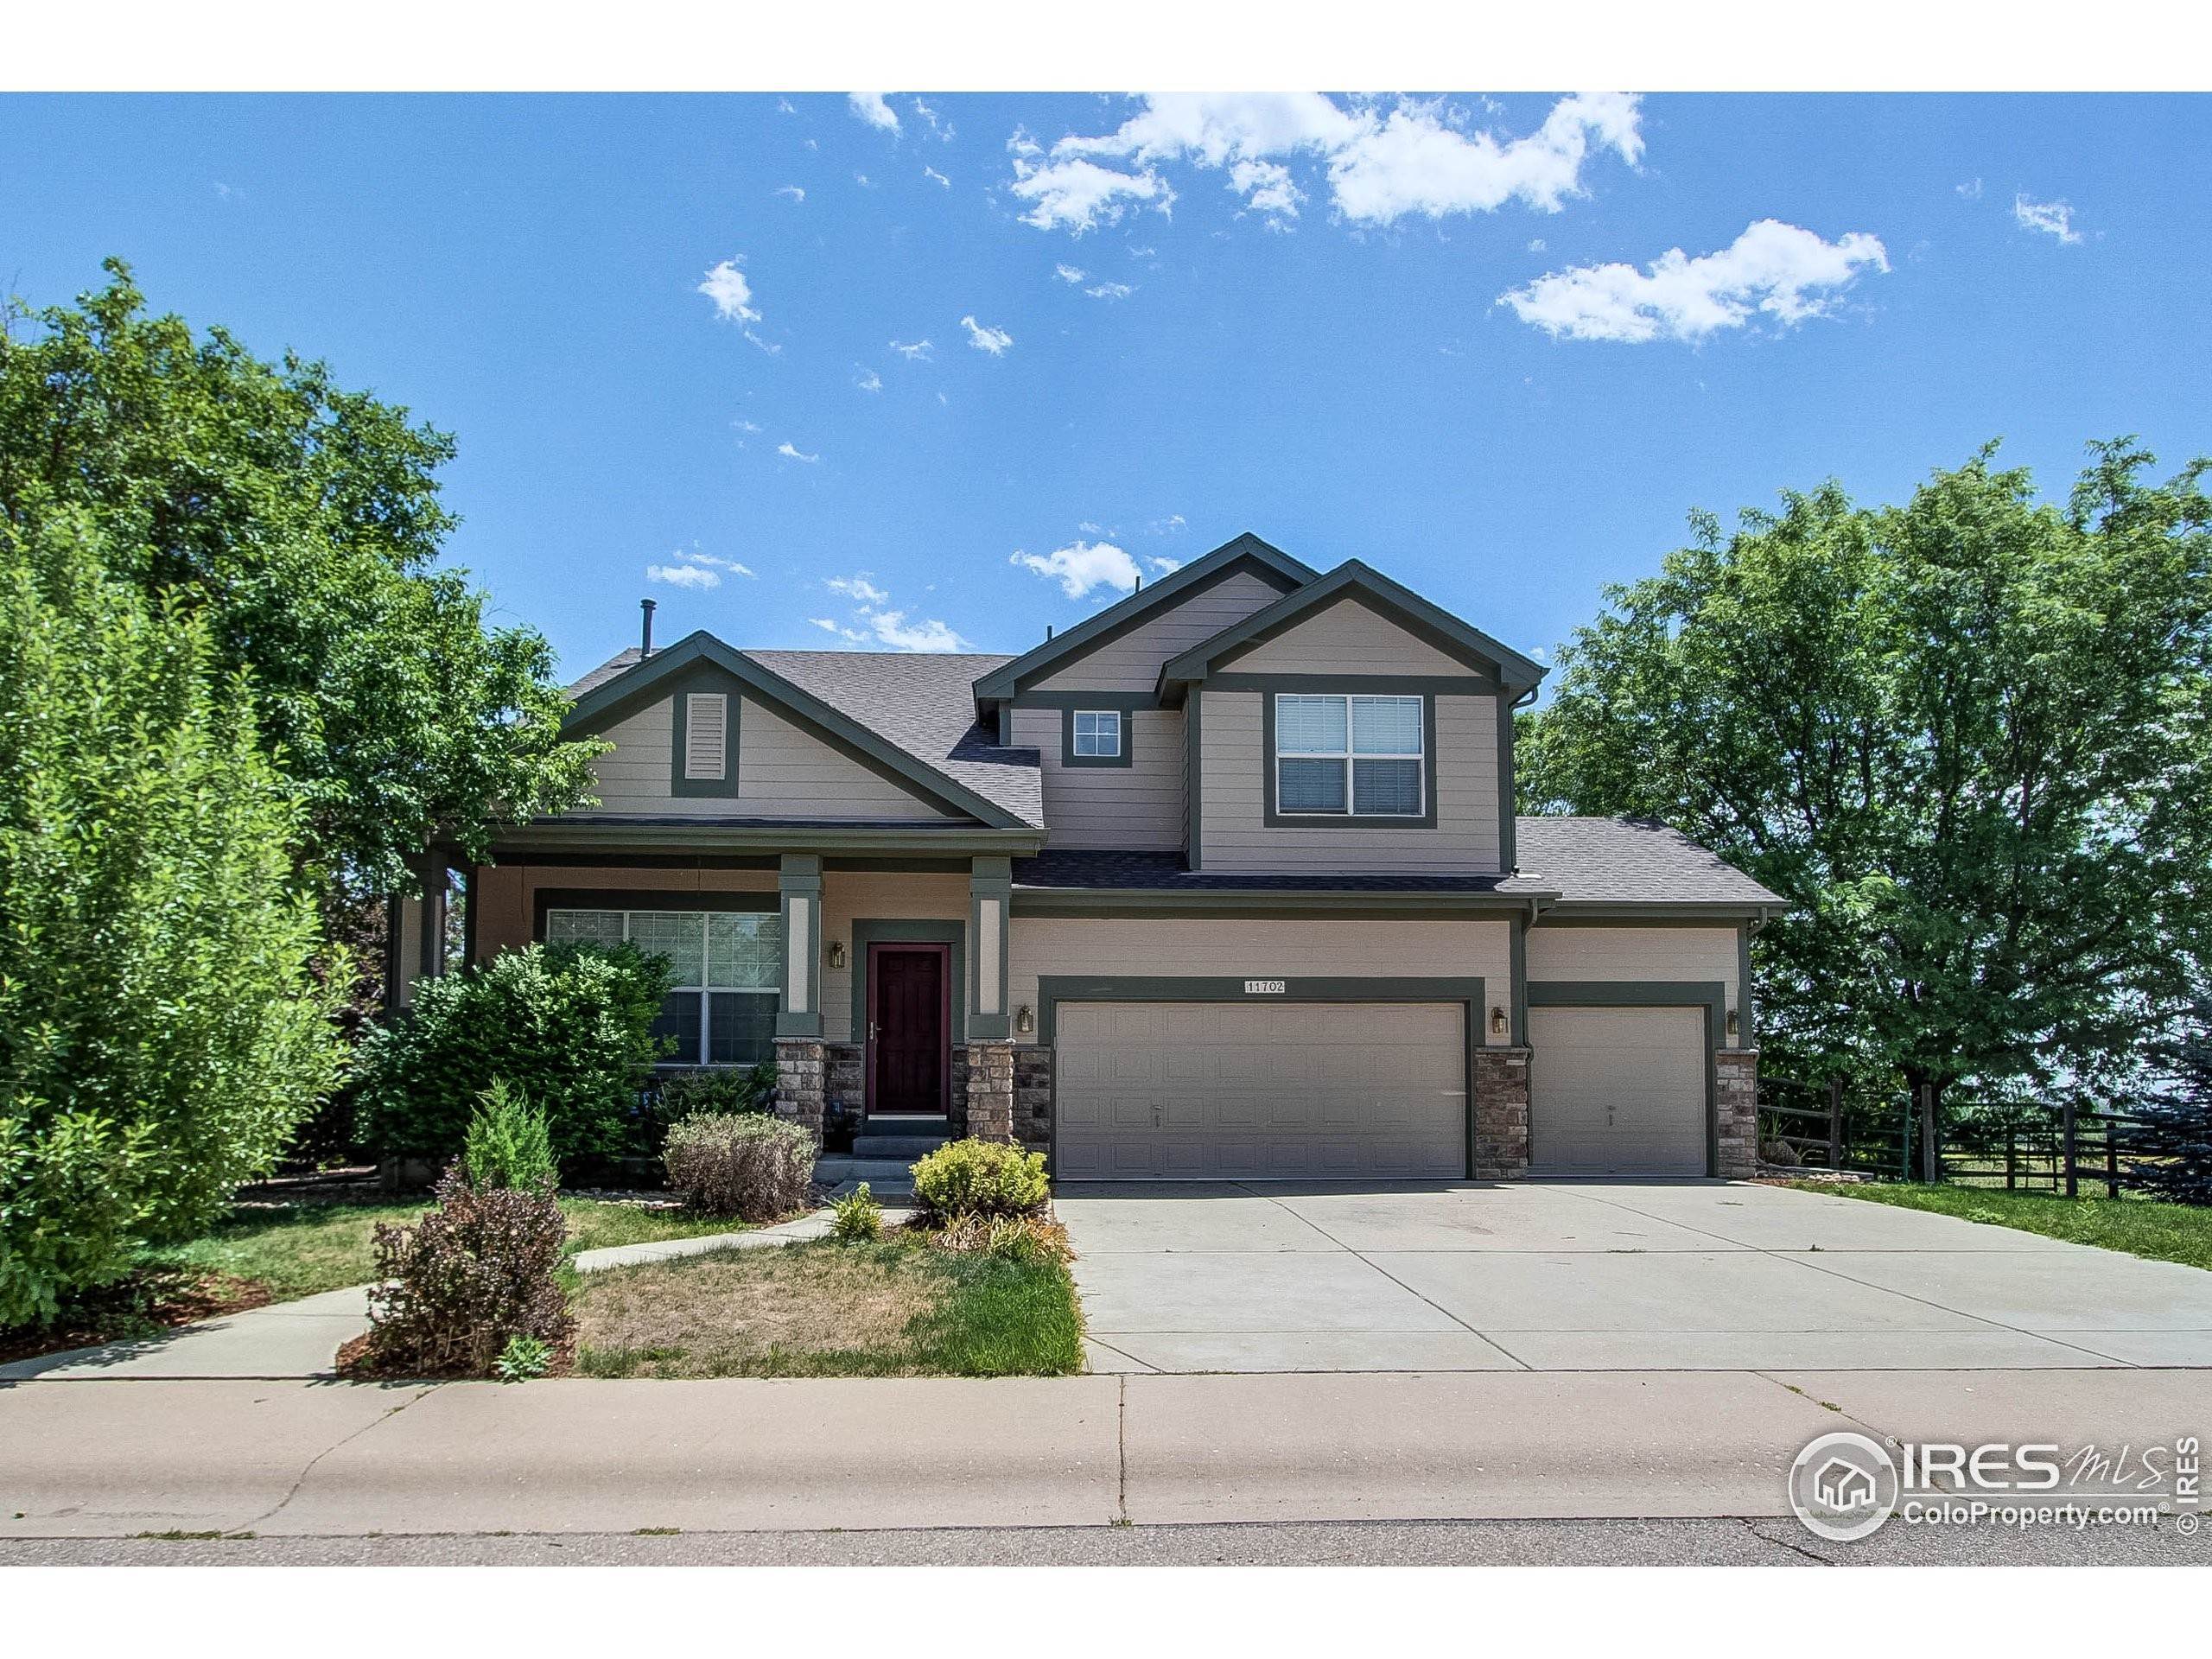 2. Single Family Homes for Active at 11702 Pleasant Hl Longmont, Colorado 80504 United States